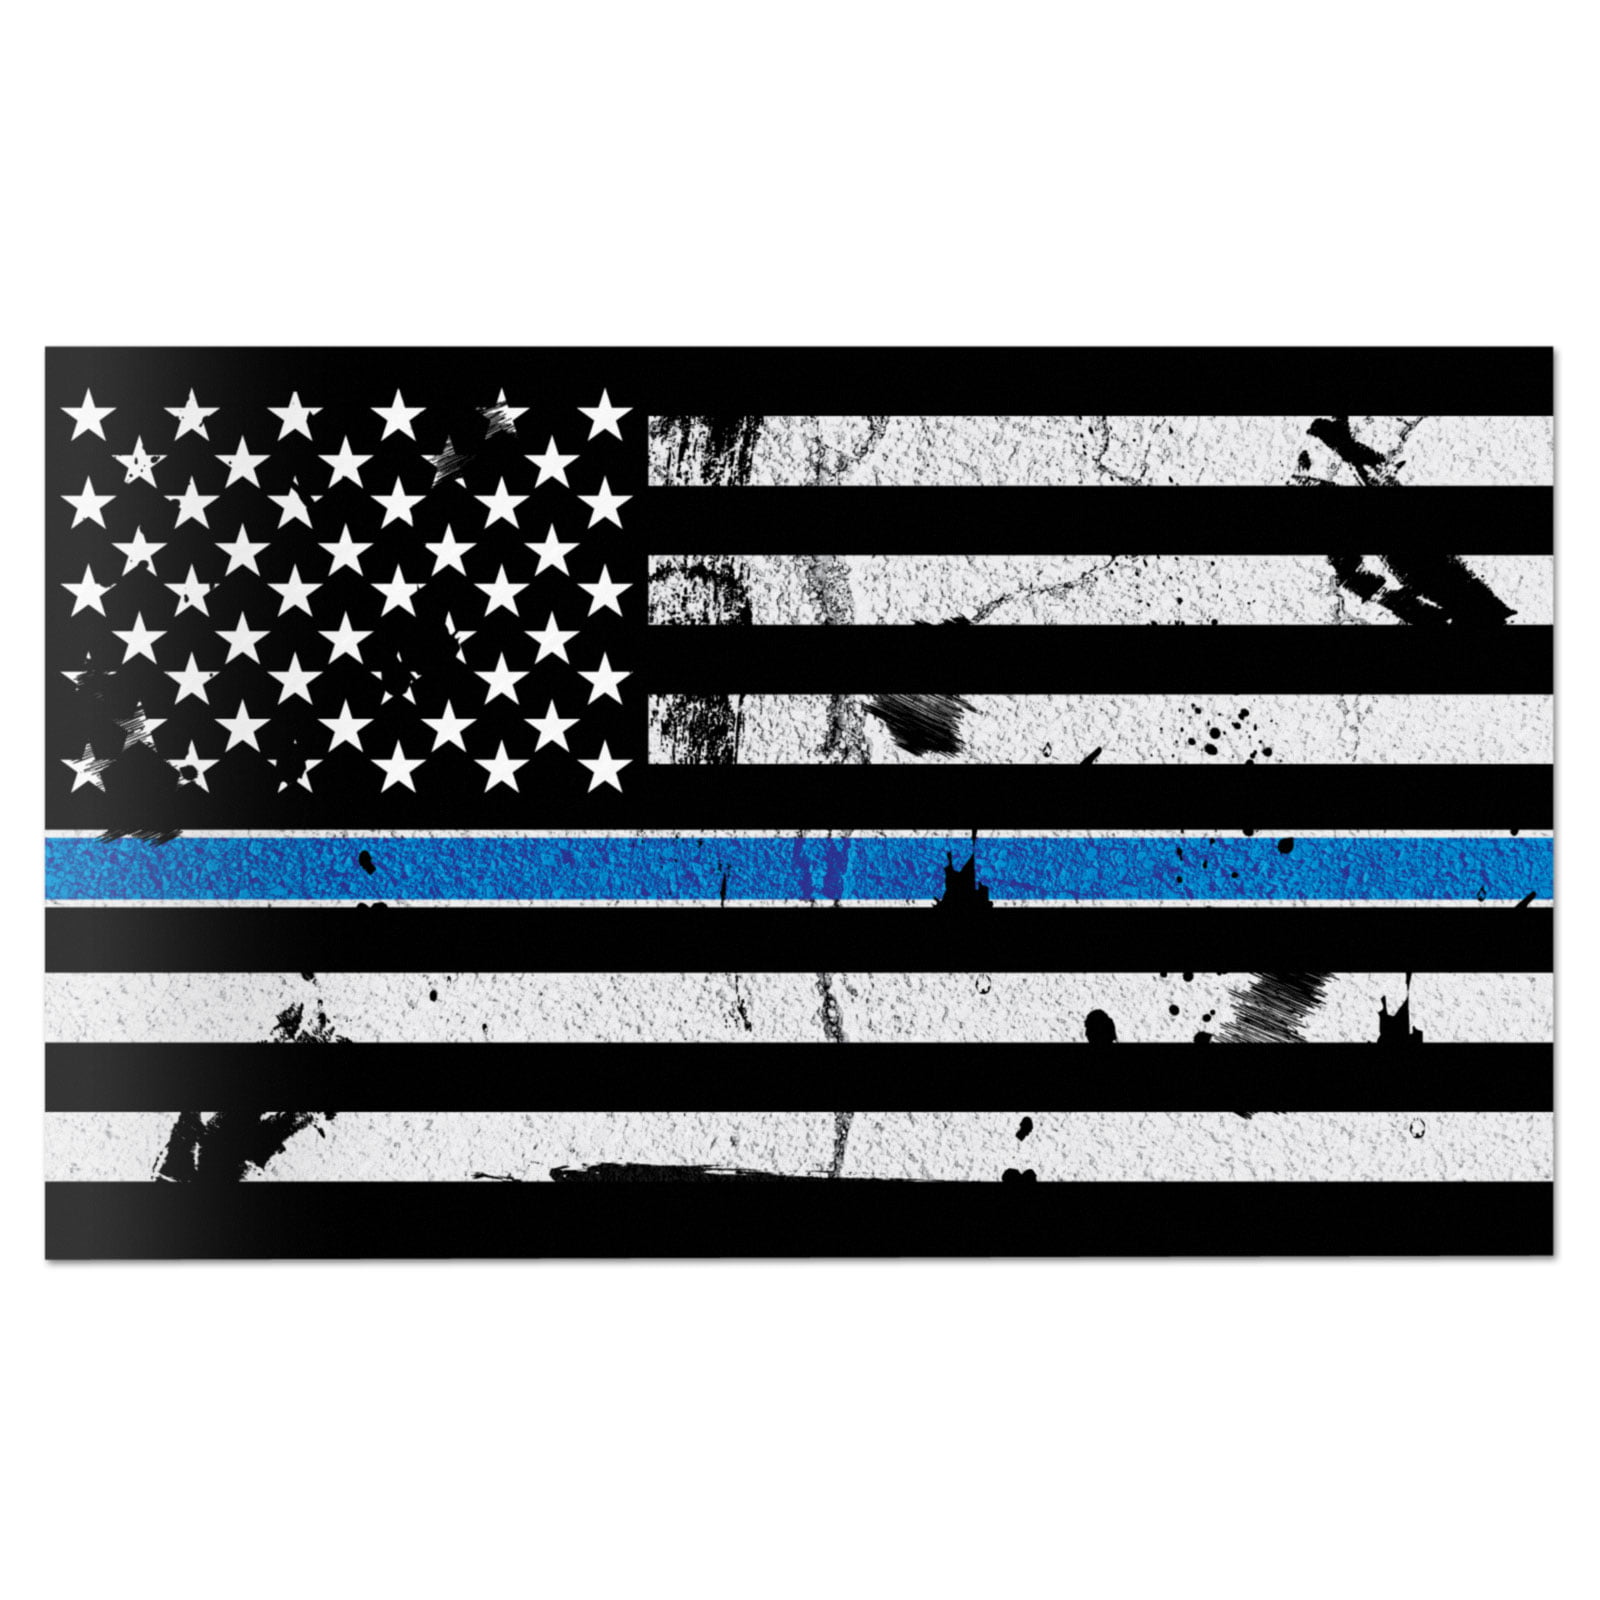 law enforcement Decal Home Decor be safe Mirror Quote Thin Blue line decal love you Vinyl Mirror or Wall Decal Police Decal